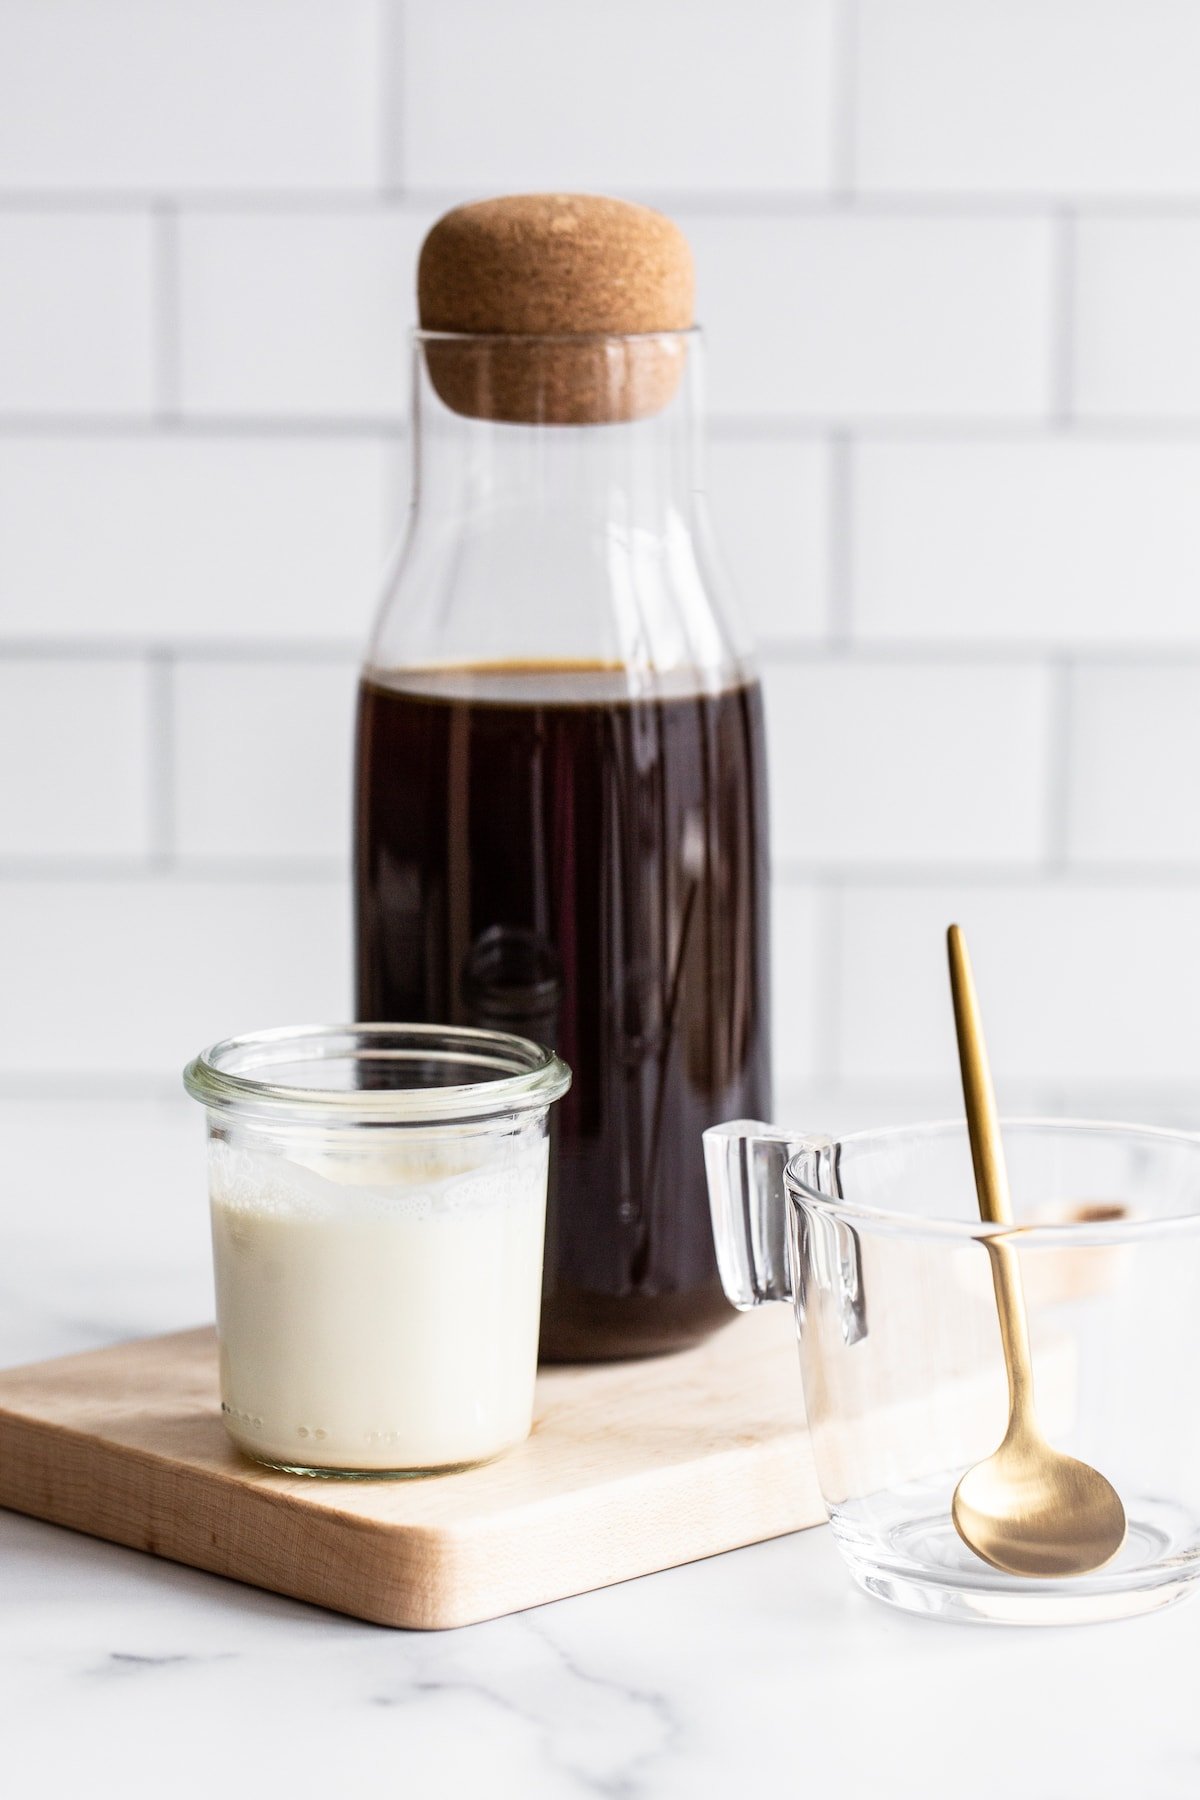 Jar of cold brew and jar of milk on a wood board. A glass container with a gold spoon is beside the board.